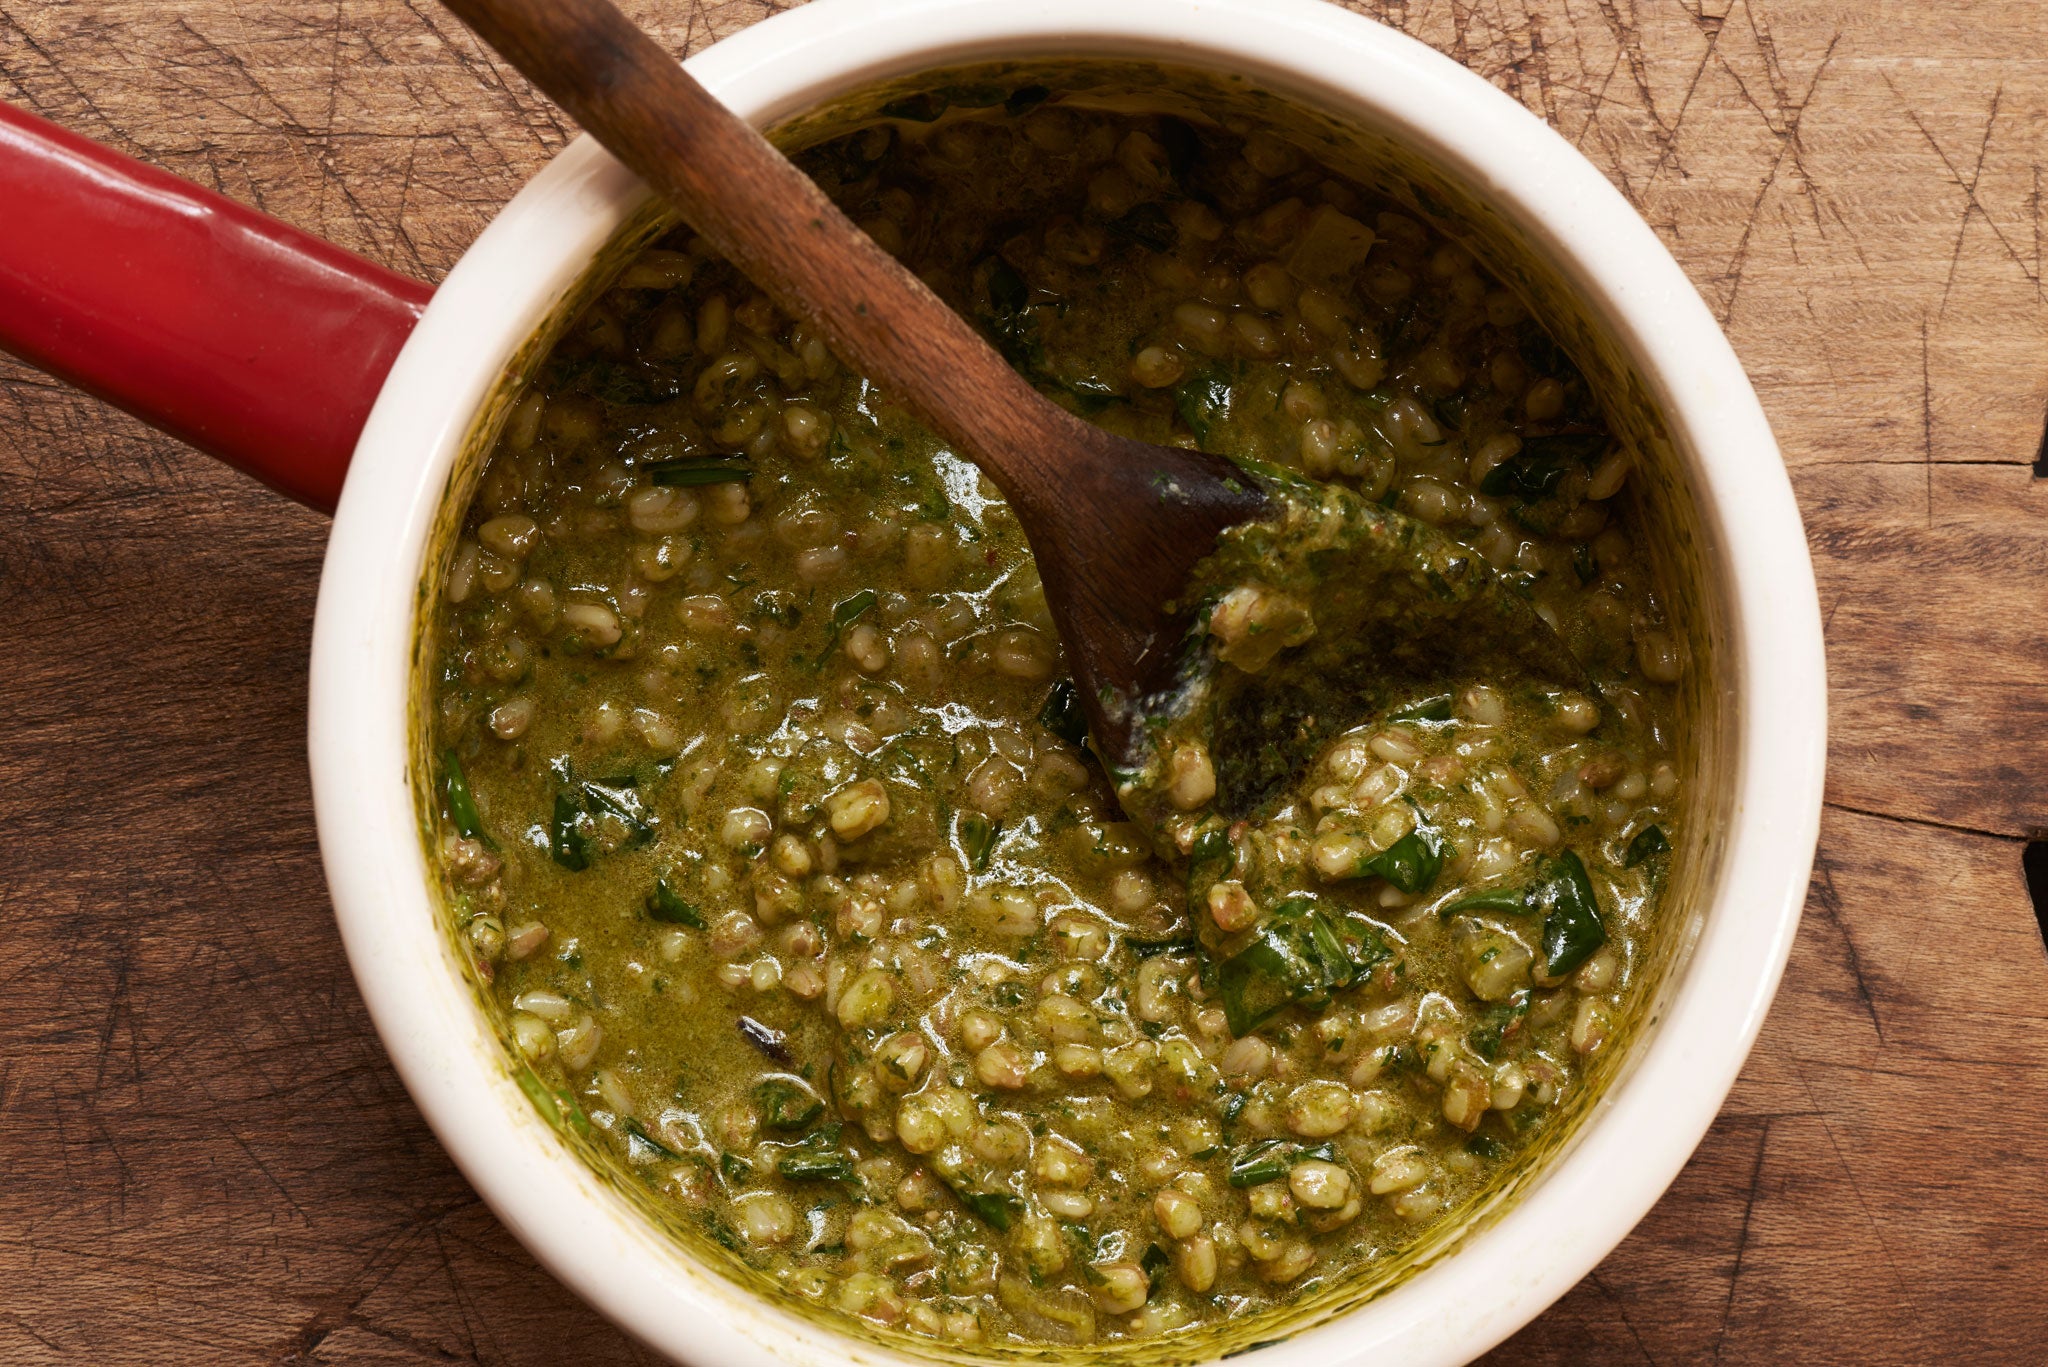 Wild garlic spelt risotto makes a great starter or vegetarian main course